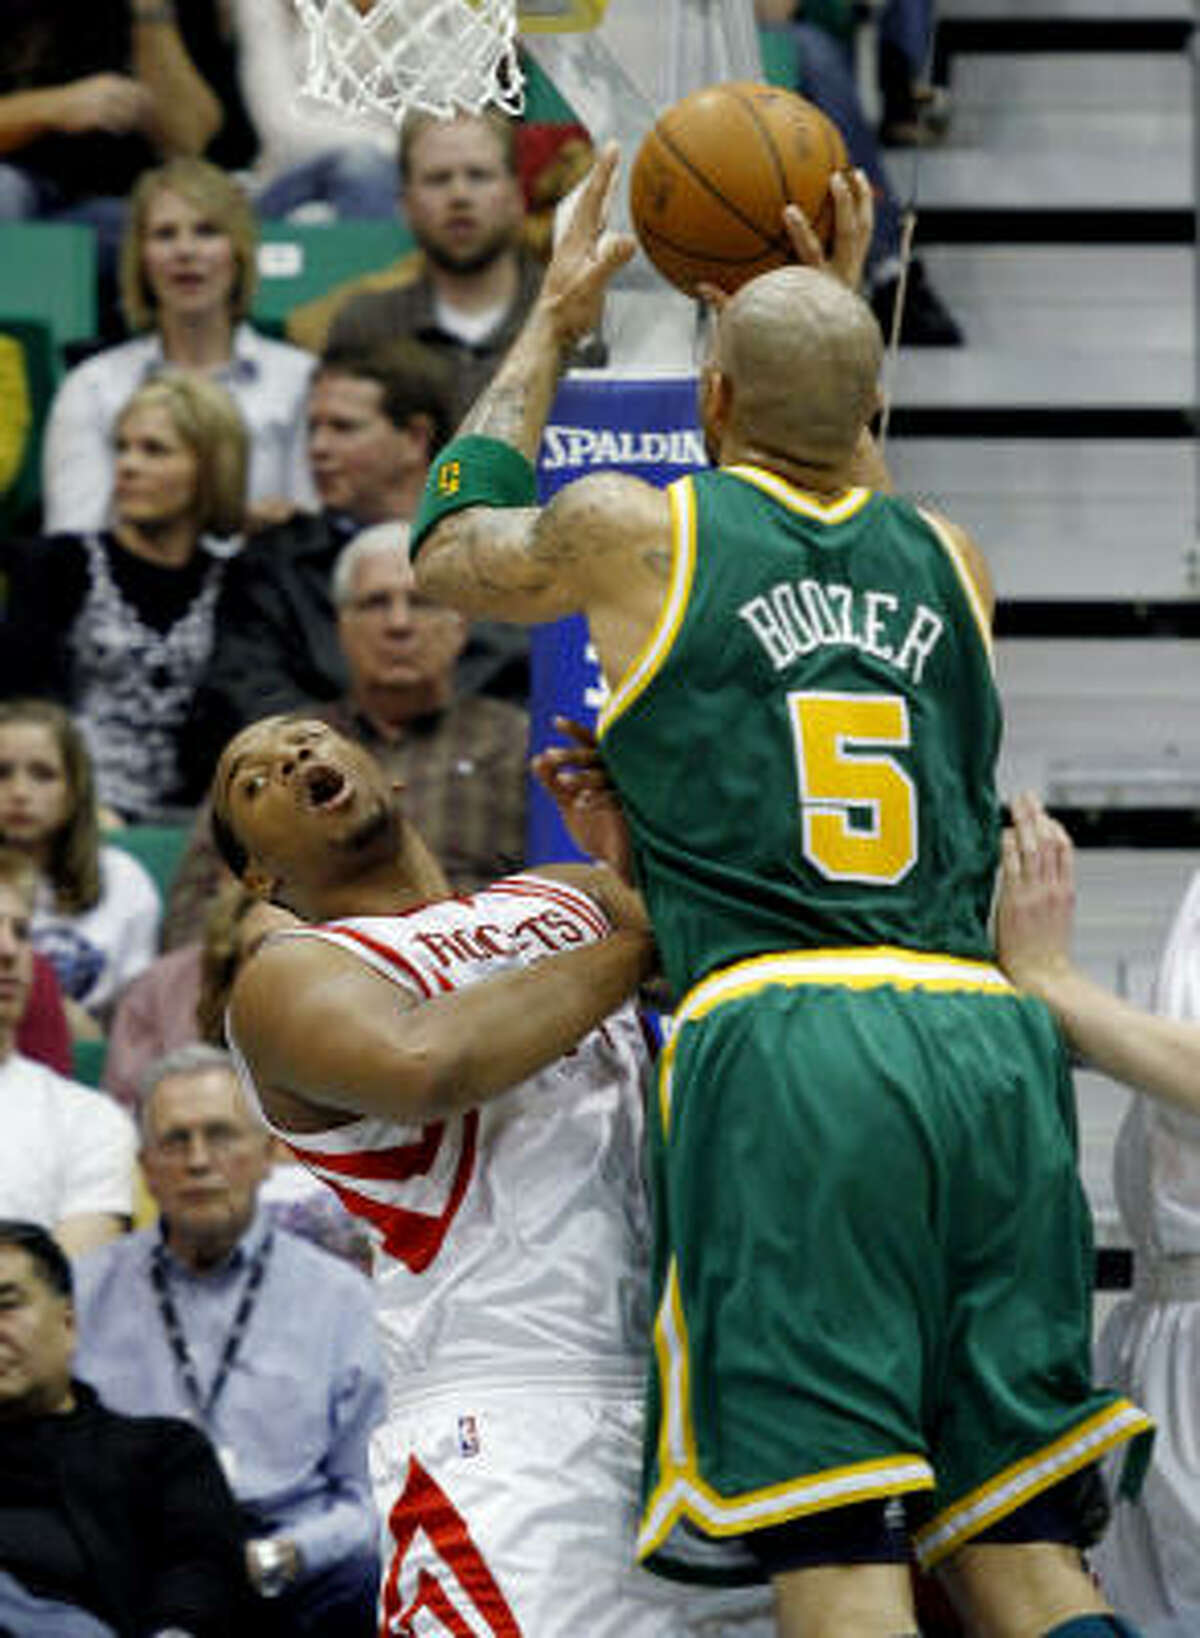 Rockets forward Chuck Hayes, left, is knocked to the floor by Jazz forward Carlos Boozer on a drive to the basket in the first half.